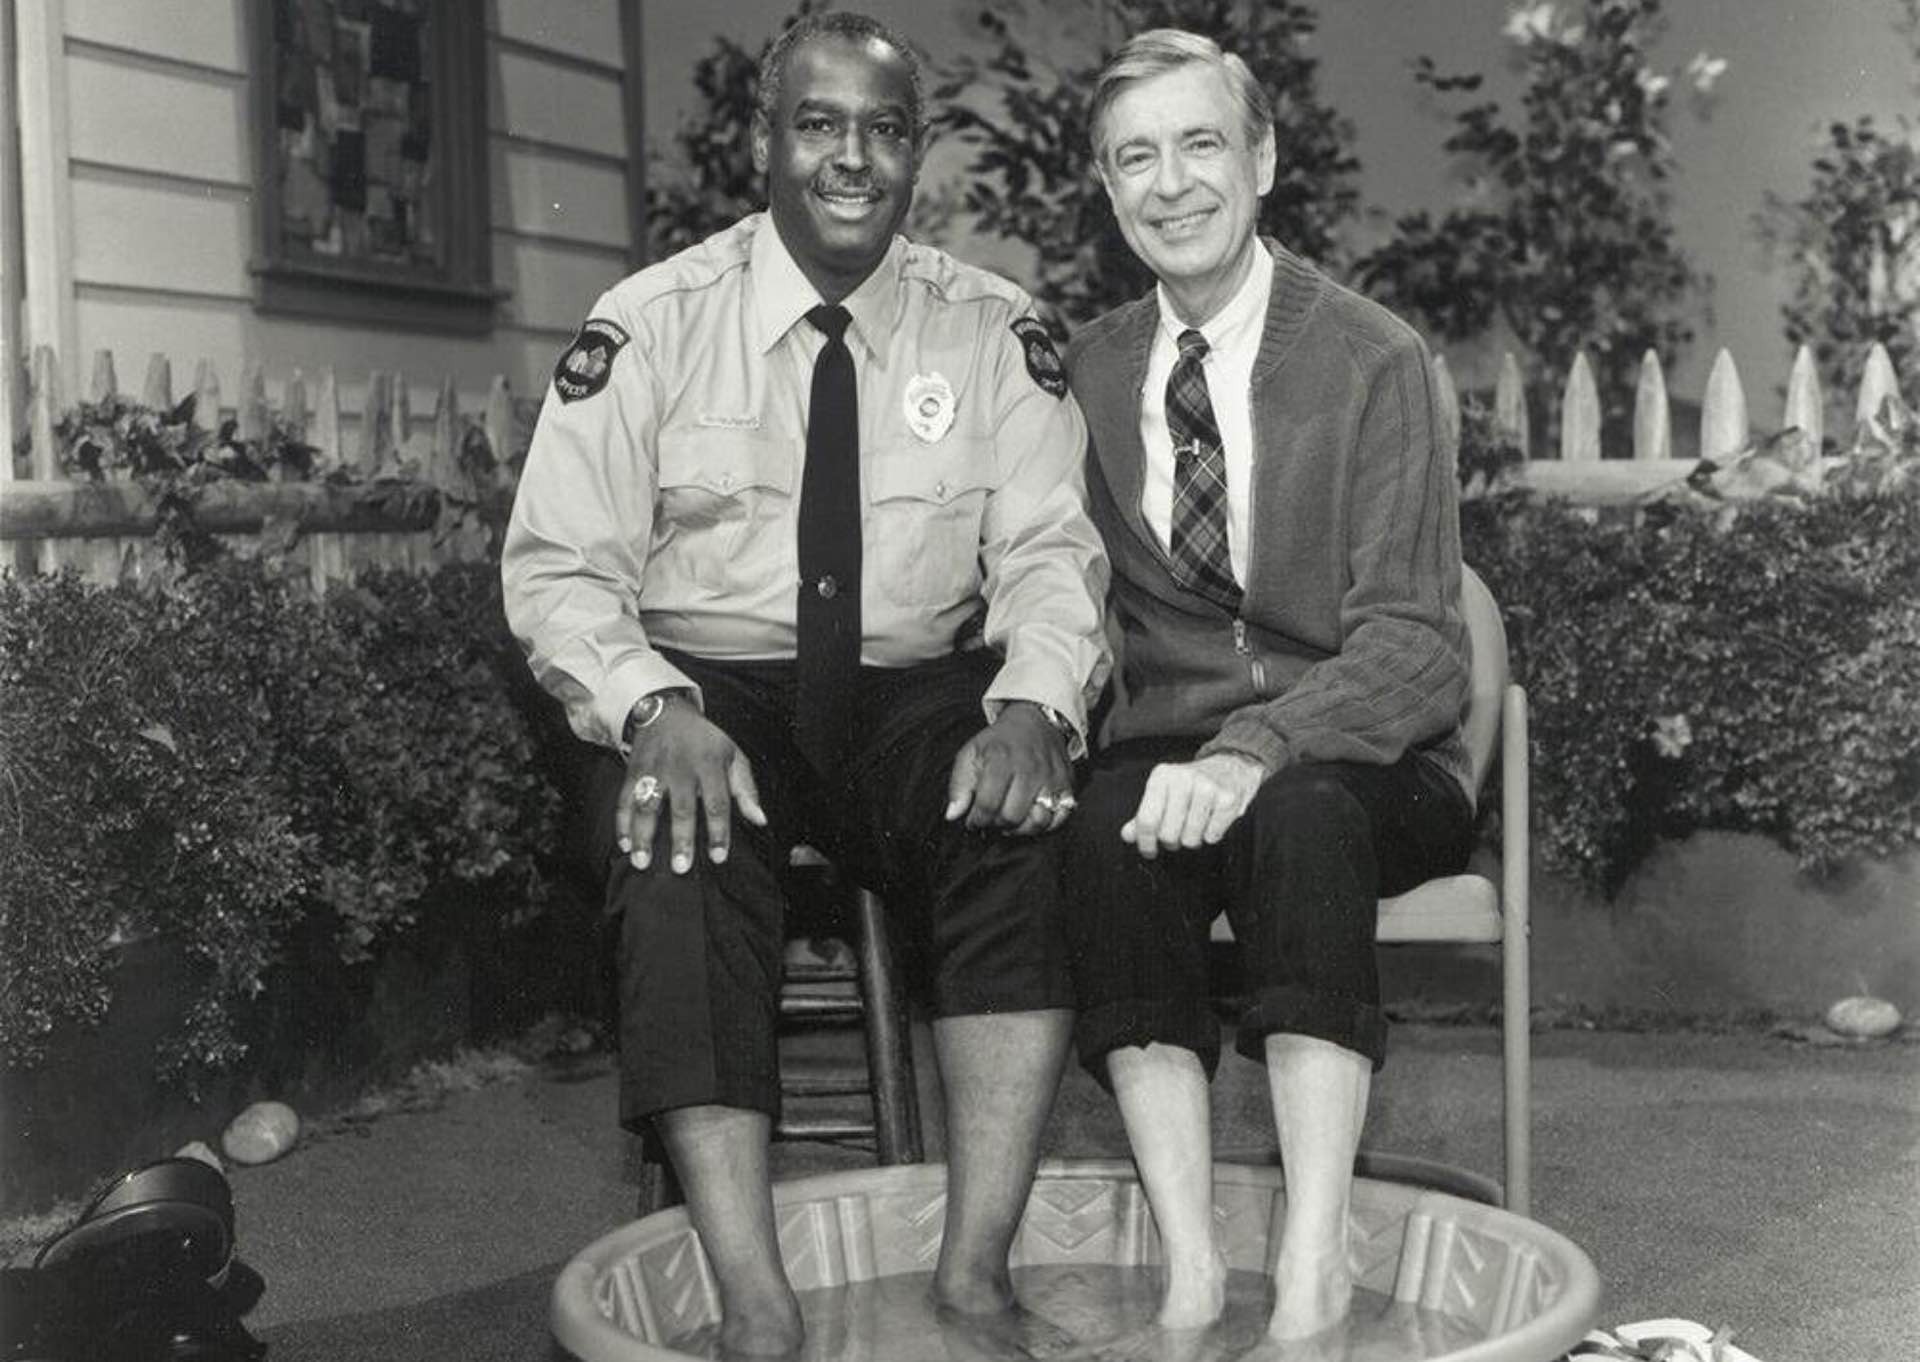 Photo: The Fred Rogers Company